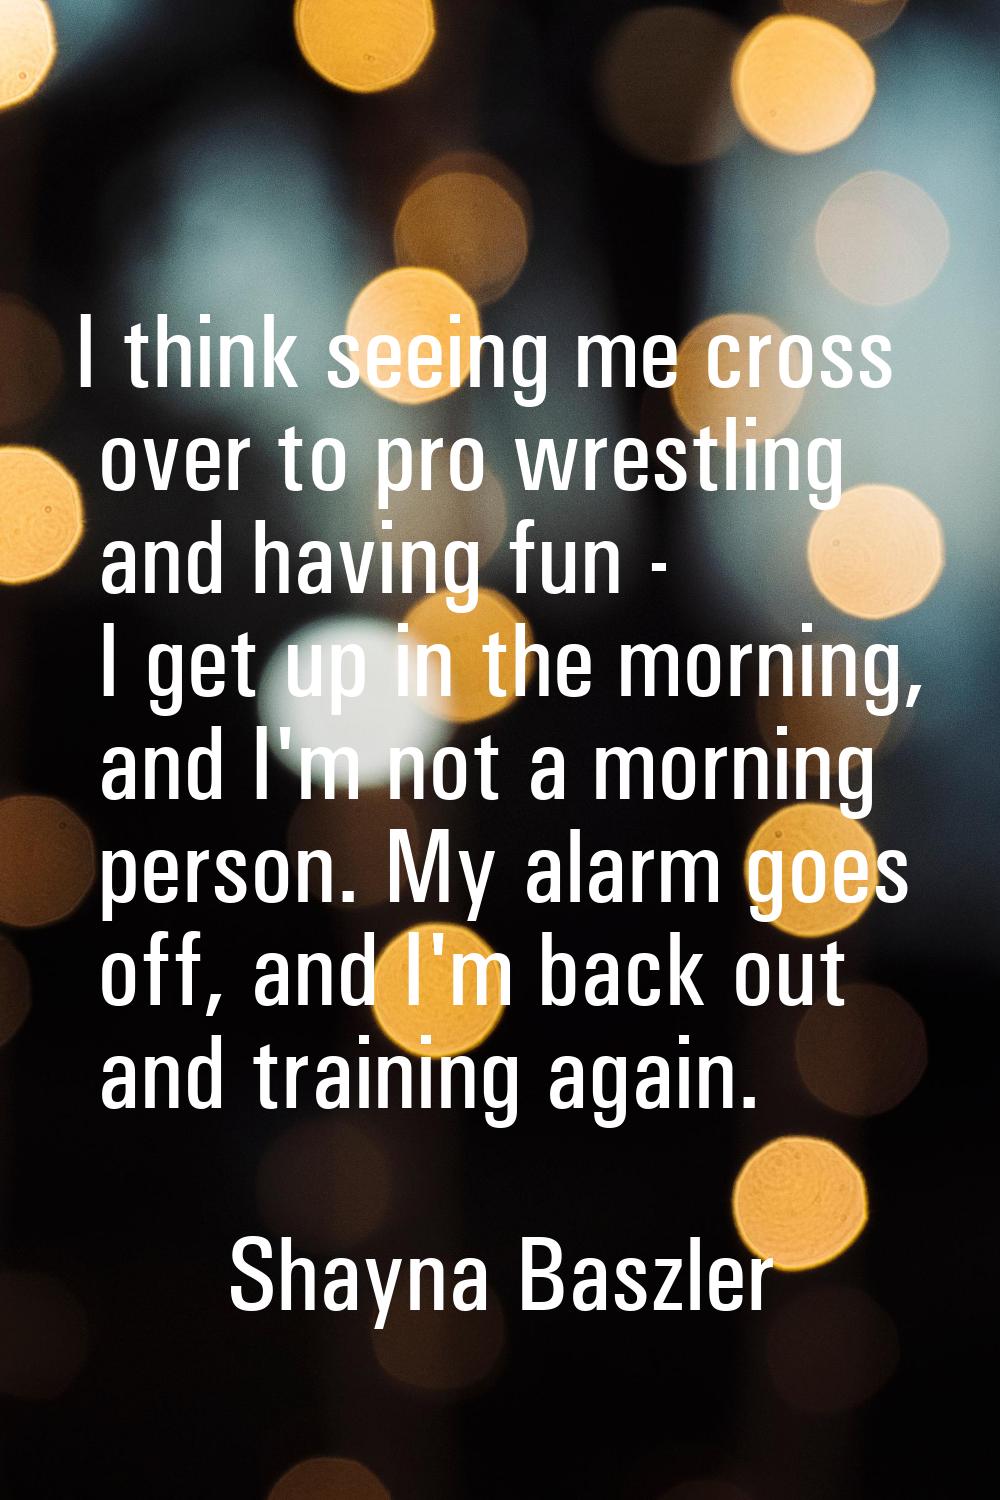 I think seeing me cross over to pro wrestling and having fun - I get up in the morning, and I'm not